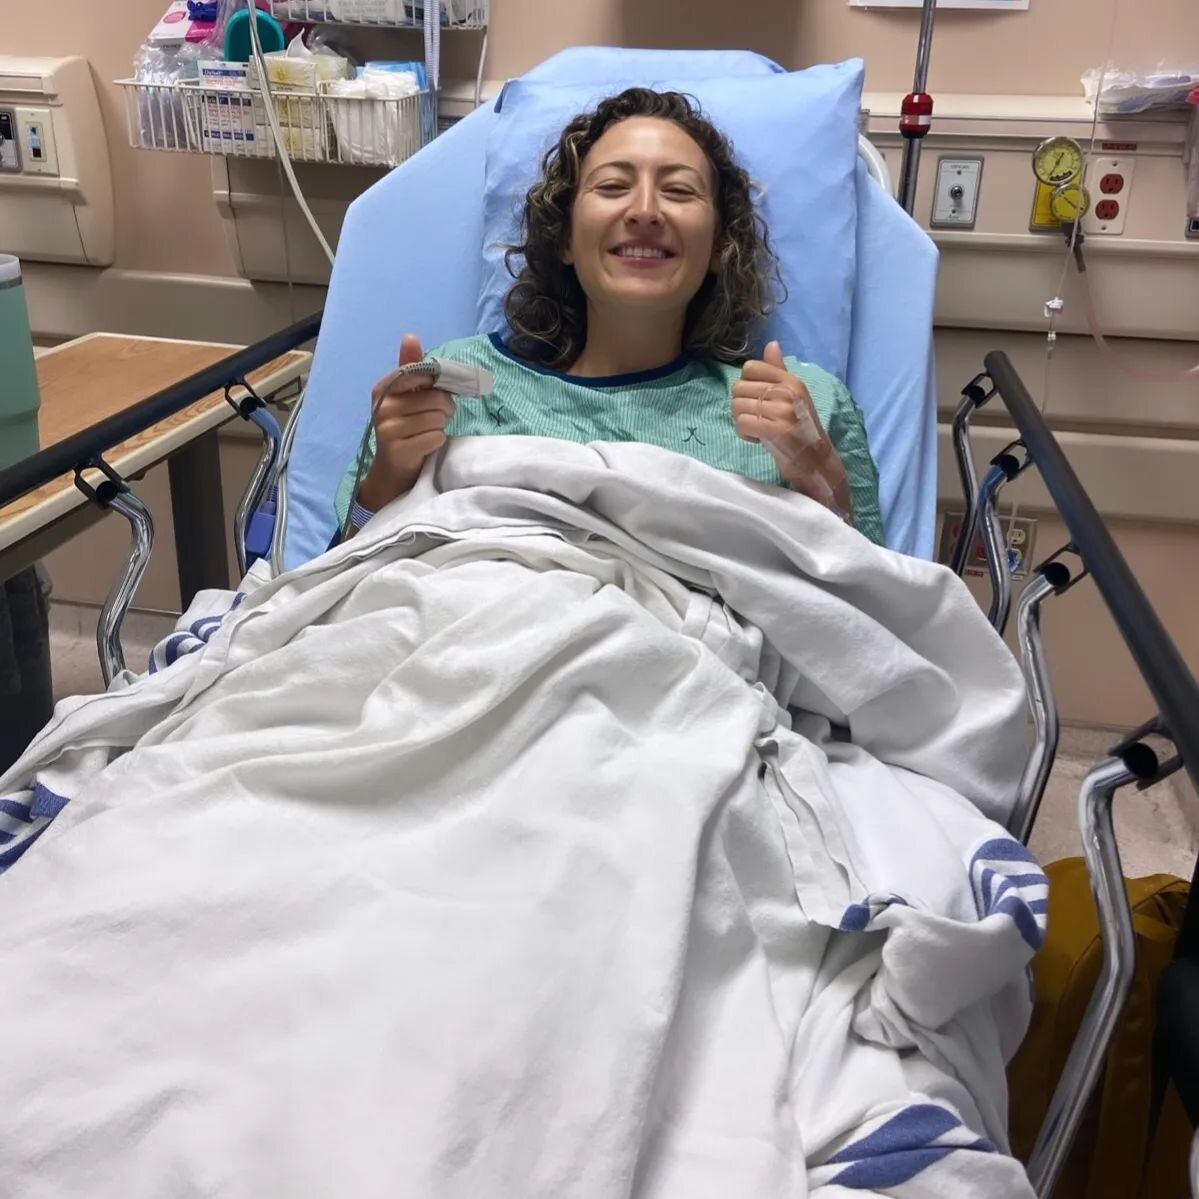 It's me, hi, 👋 I'm the Endometriosis patient, it's me.&nbsp;

It's #endoawarenessmonth and I thought it fitting to share this photo of me right after my endometriosis surgery! This year marks my 20th anniversary of chronic pain ✌️

Everybody says th